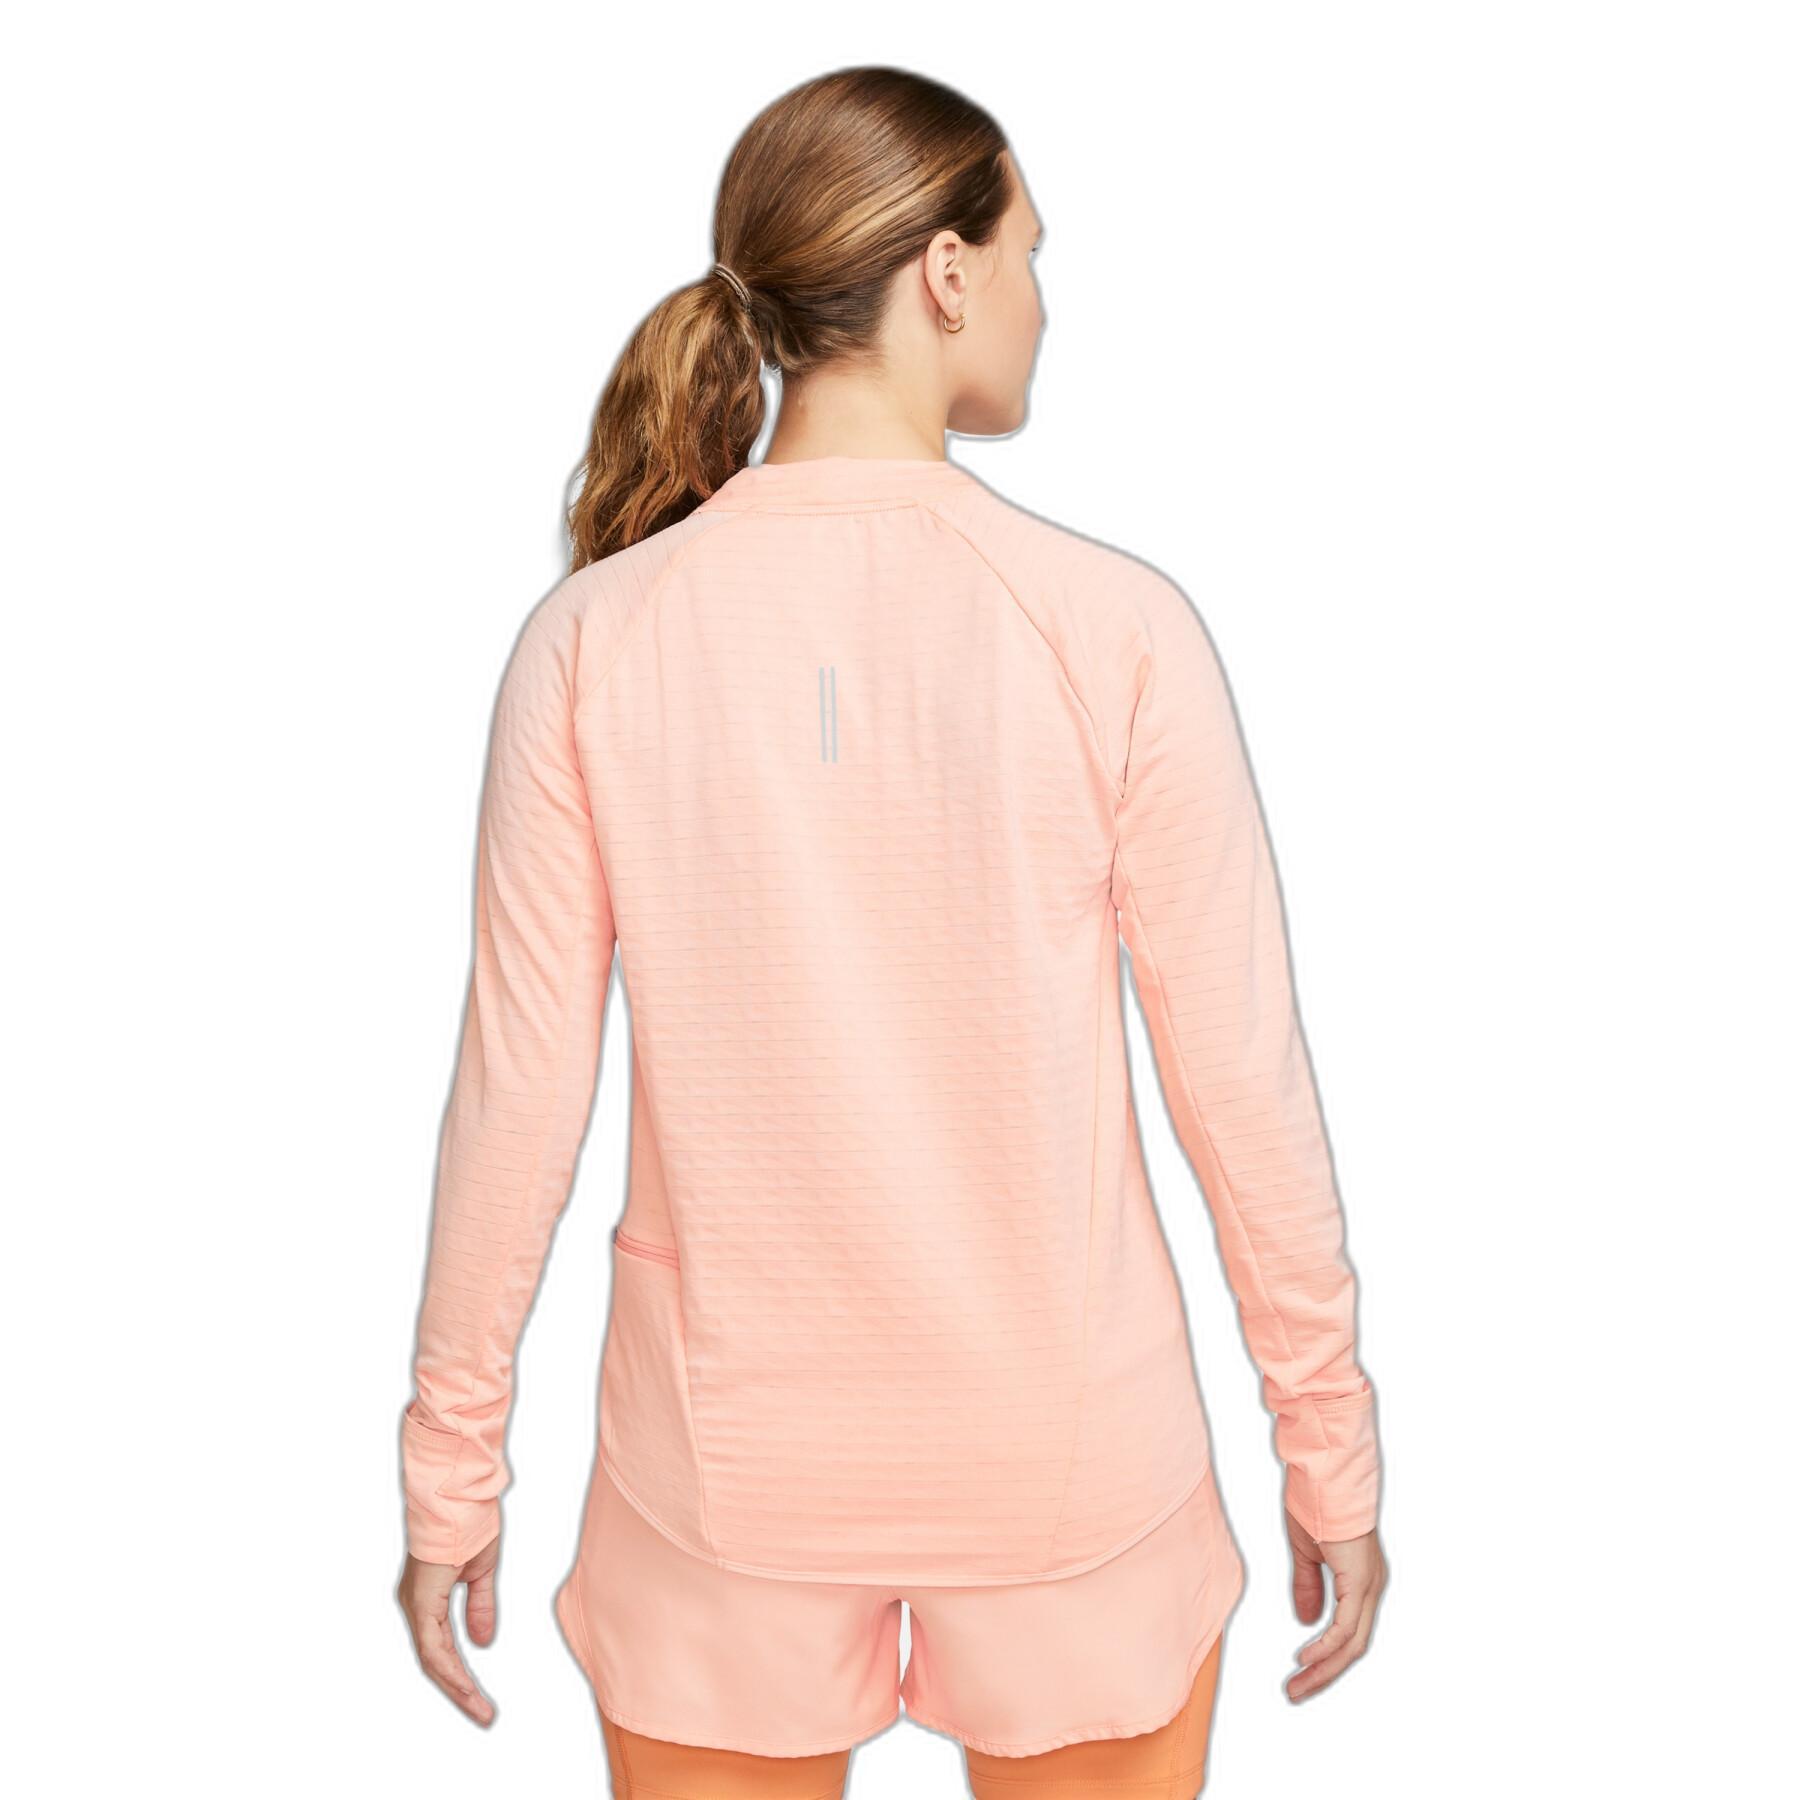 Women's long sleeve T-shirt Nike Therma-FIT Element Crew